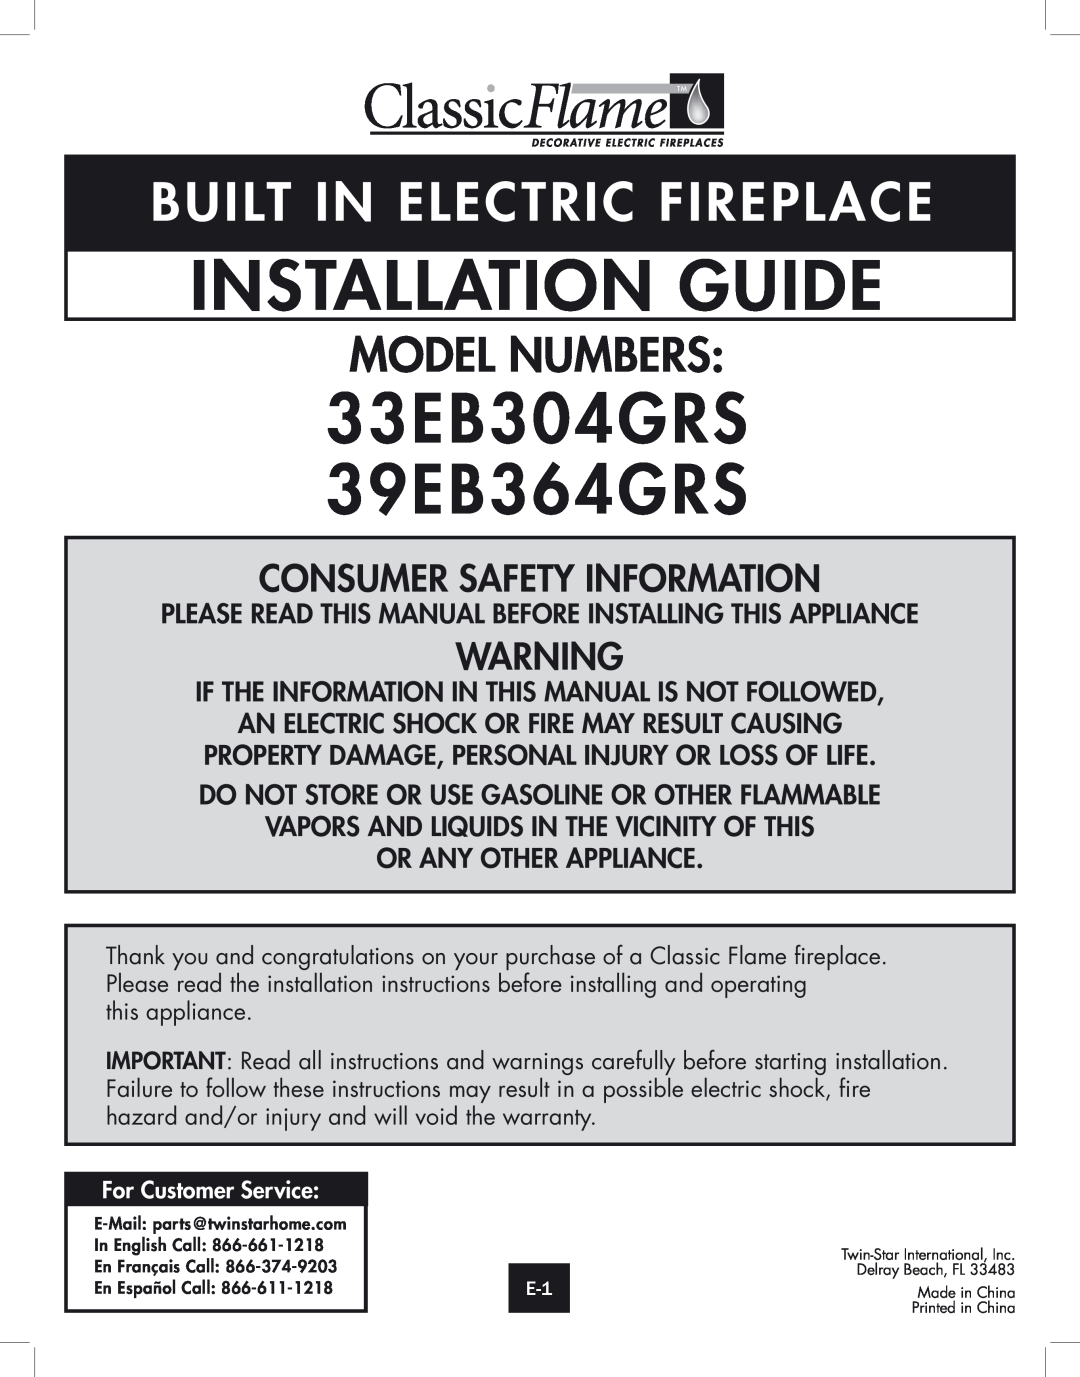 Twin-Star International installation instructions Installation Guide, 33EB304GRS 39EB364GRS, Model Numbers 